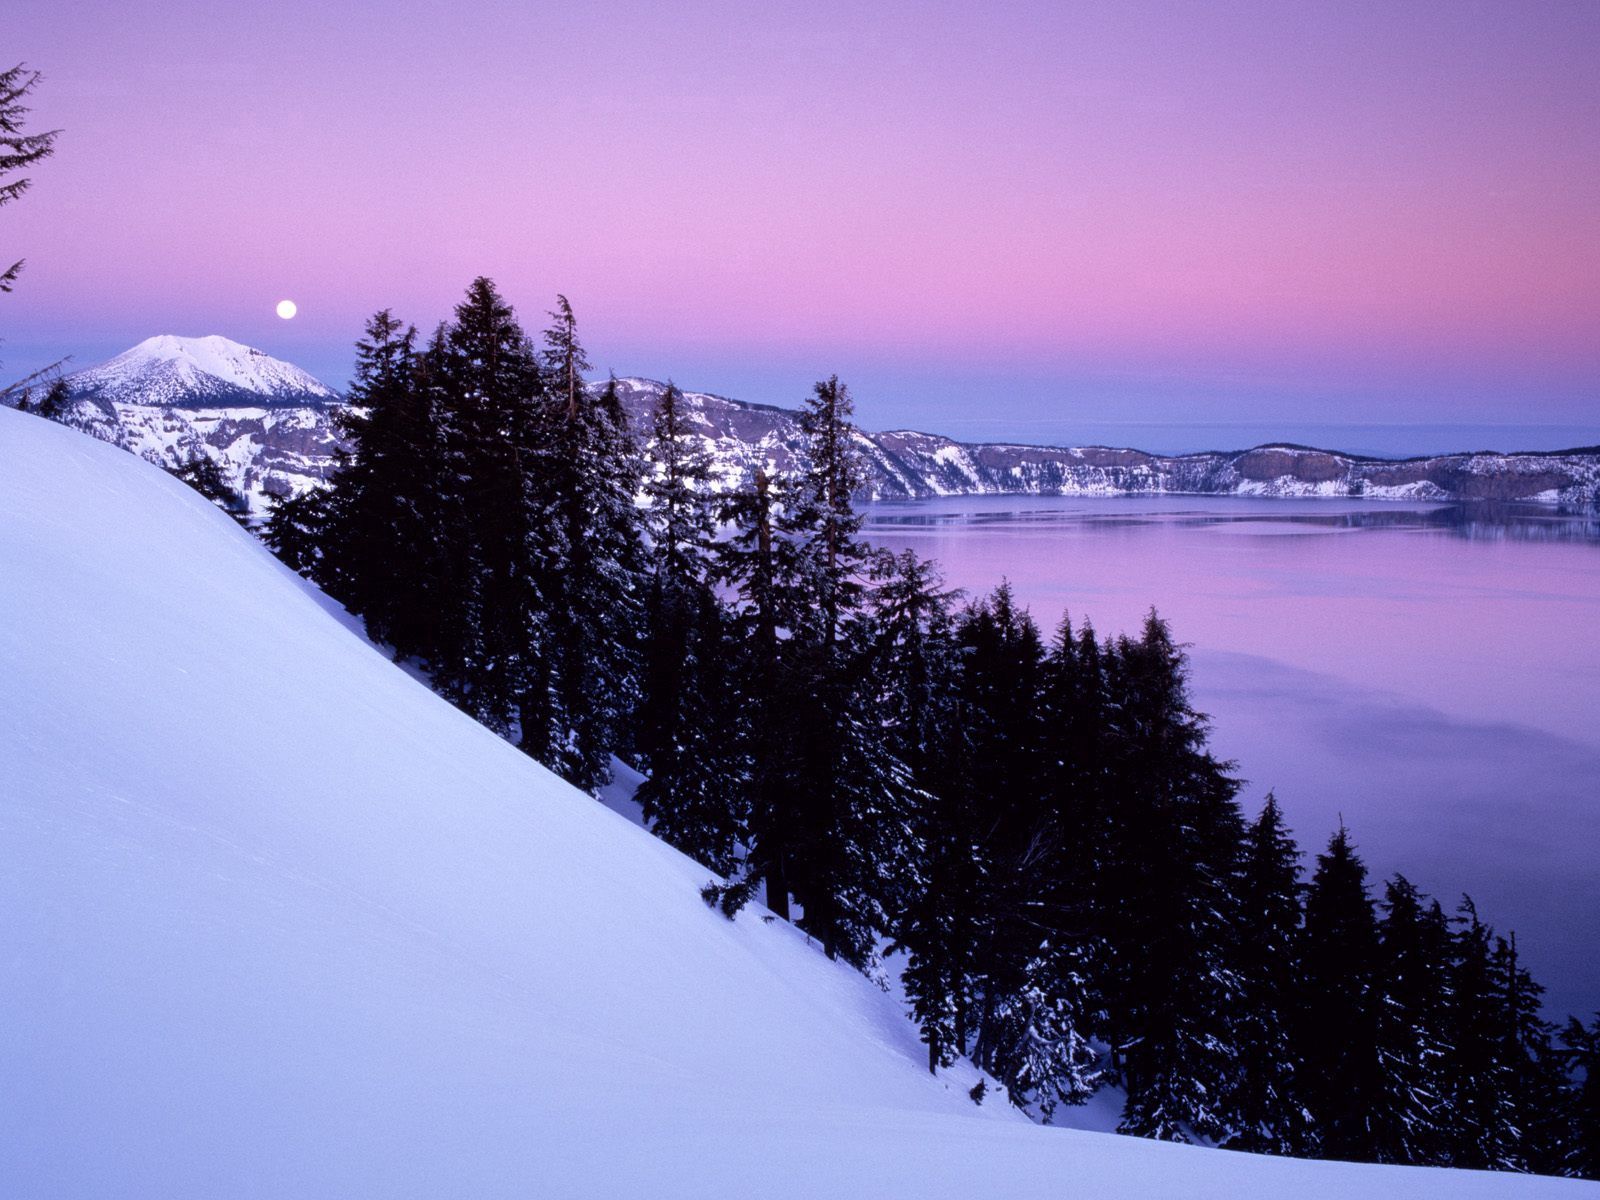 Download wallpaper 1600x1200 slope, mountain, snow, winter, evening, trees,  calmness hd background